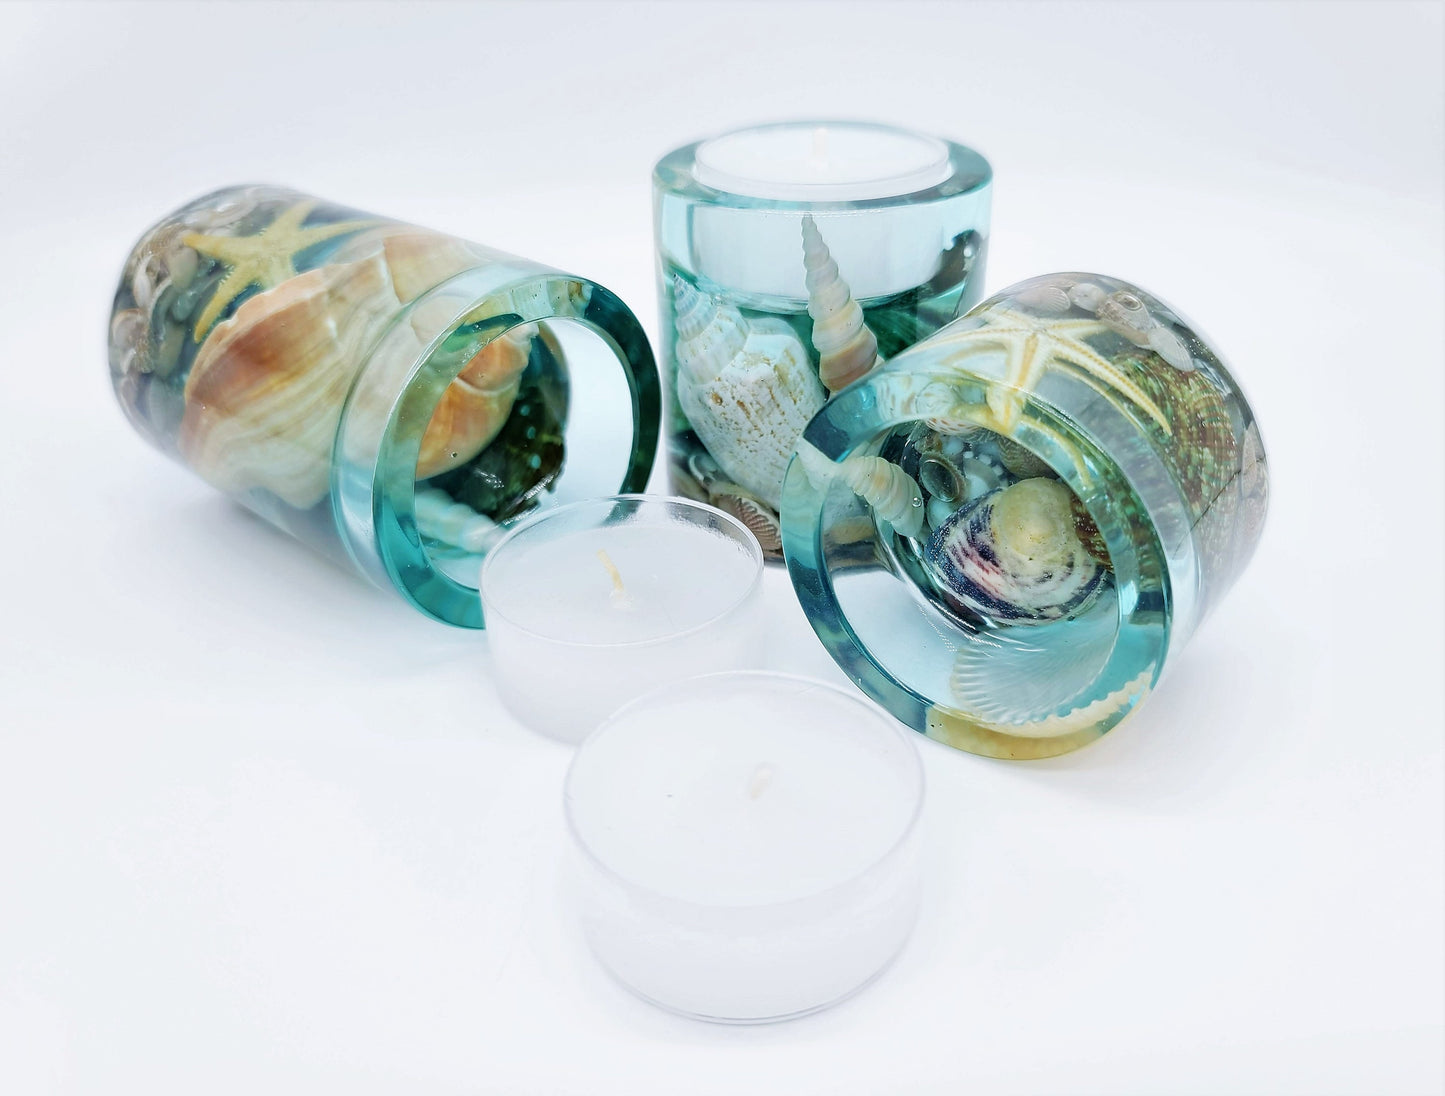 Seascape Candle Holder Made with Eco-Friendly Epoxy Resin and Seashells - Includes Choice of Real SCENTED Tealight or LED Tealight